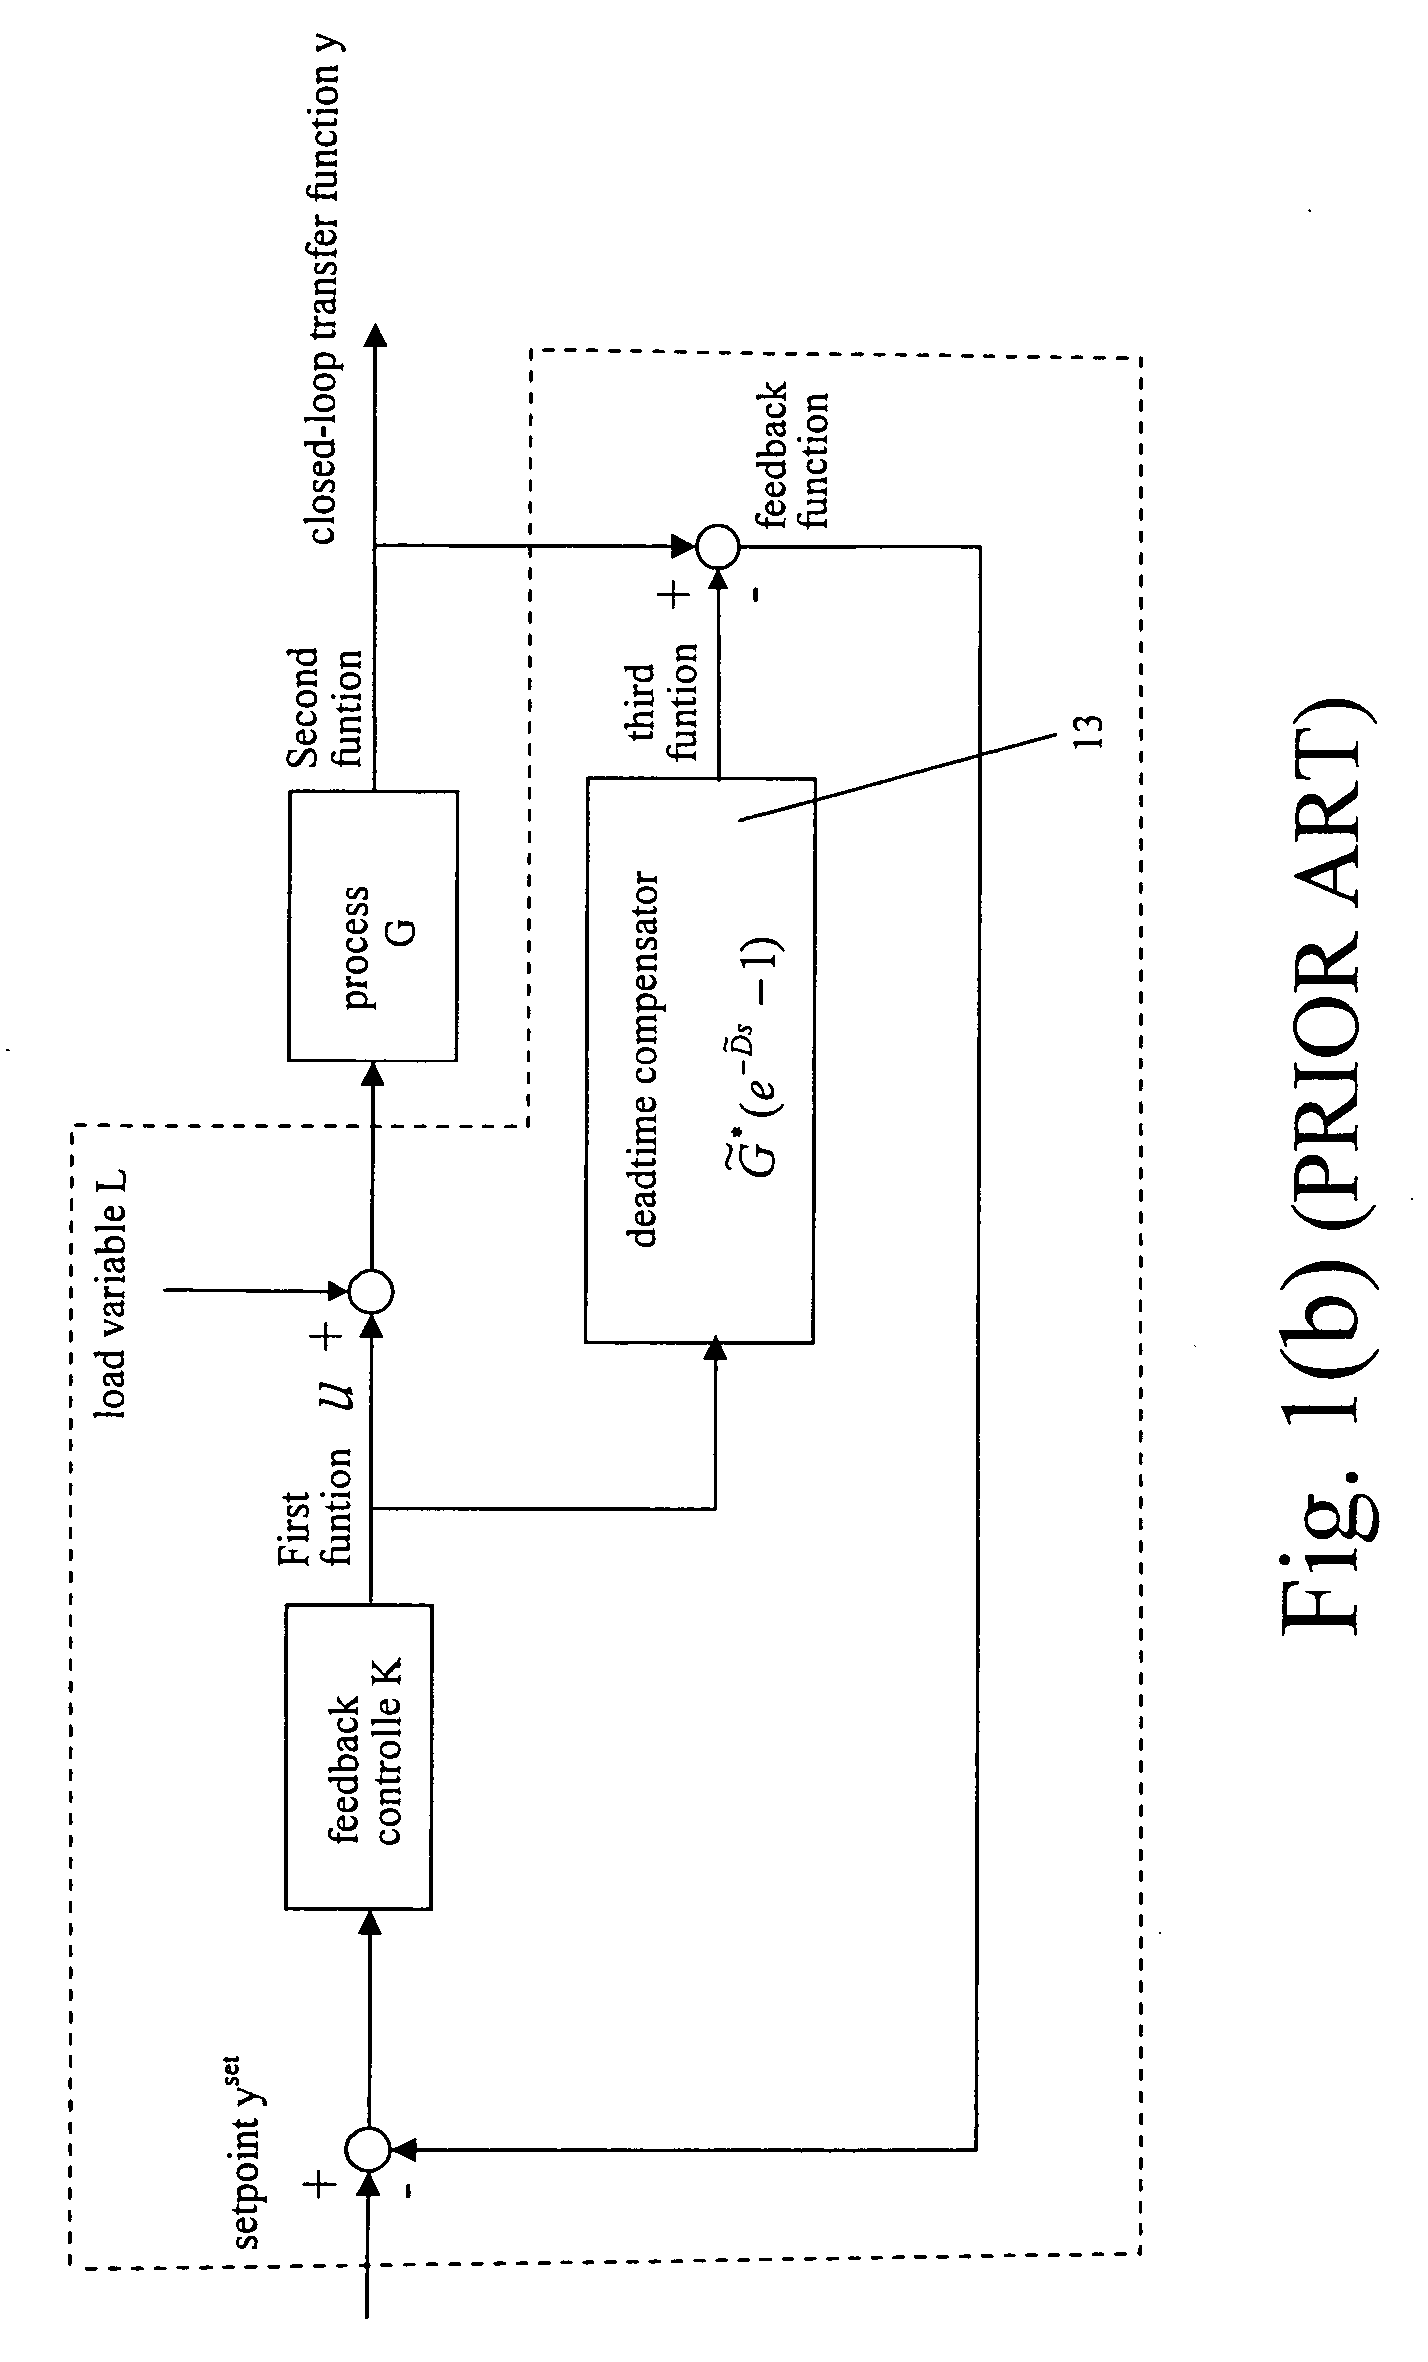 Method and apparatus for PID controller with adjustable deadtime compensation